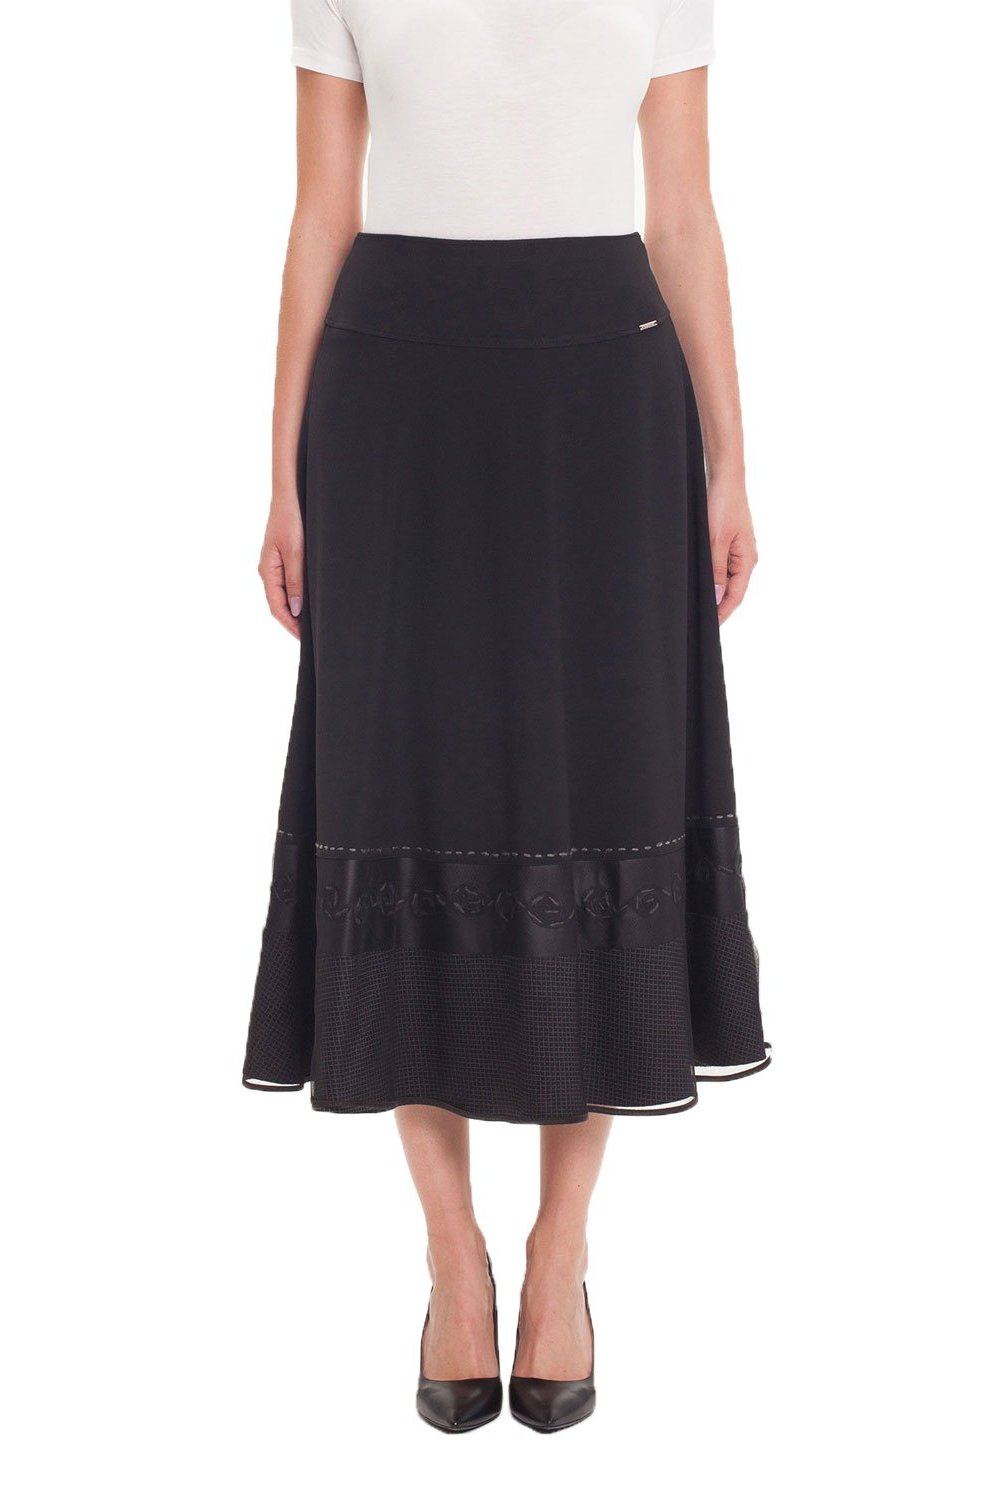 Embroidered Midi Black Skirt with Check Pattern and Tulle Around The Hemline Guzella